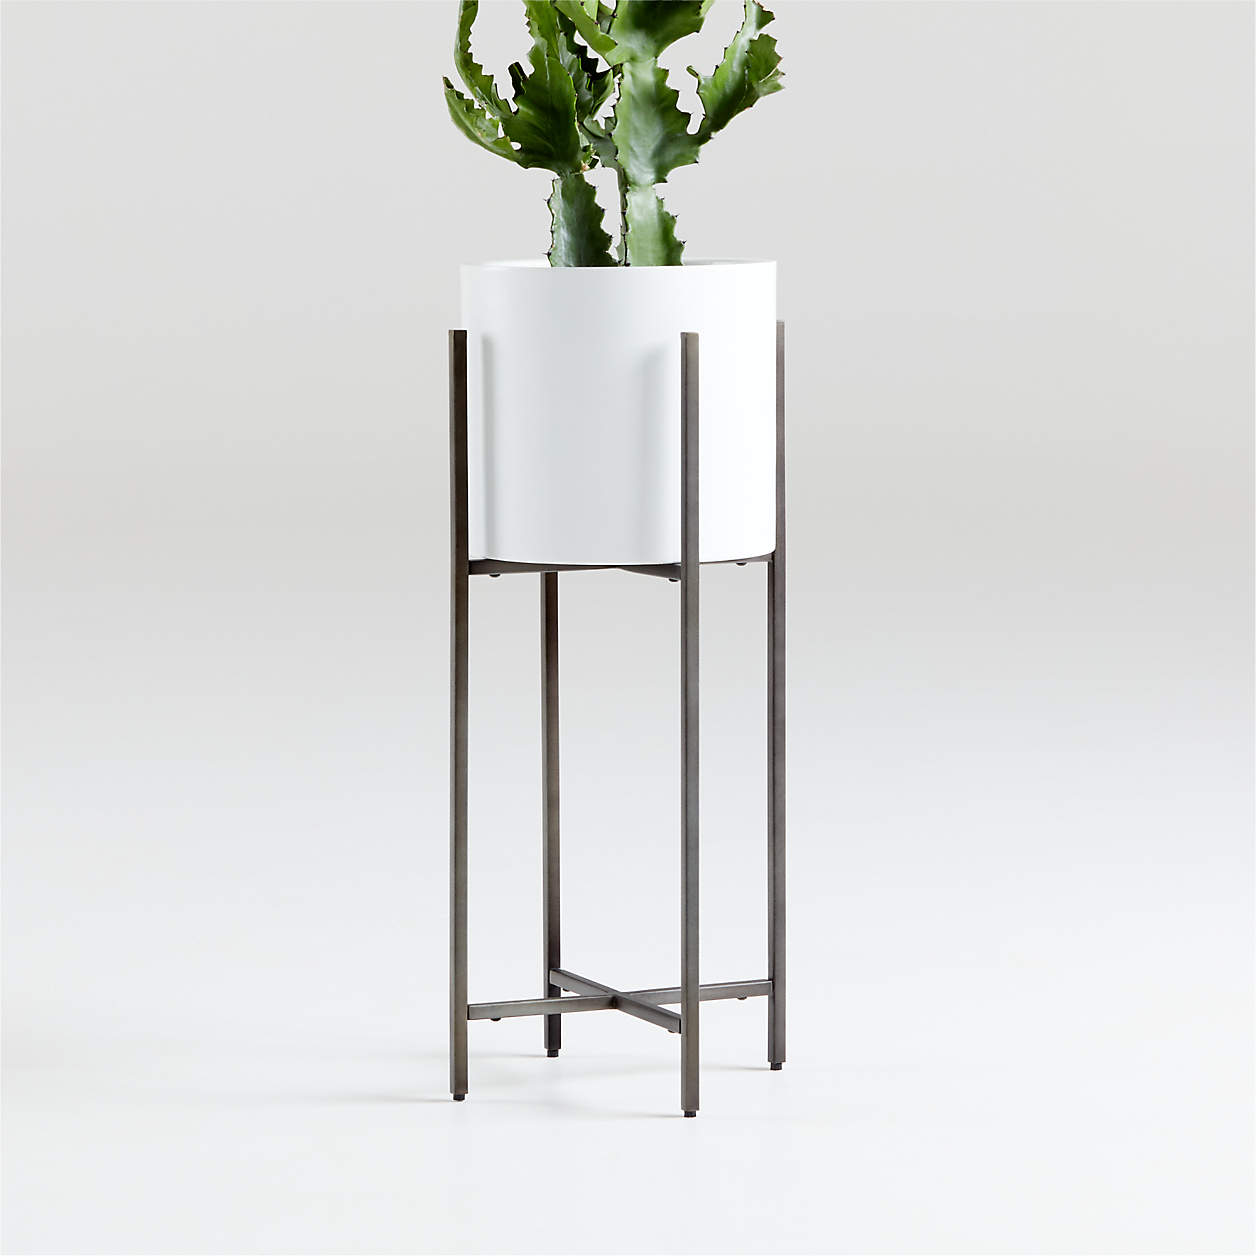 Shop Dundee White Round Planter with Short Stand from Crate and Barrel on Openhaus